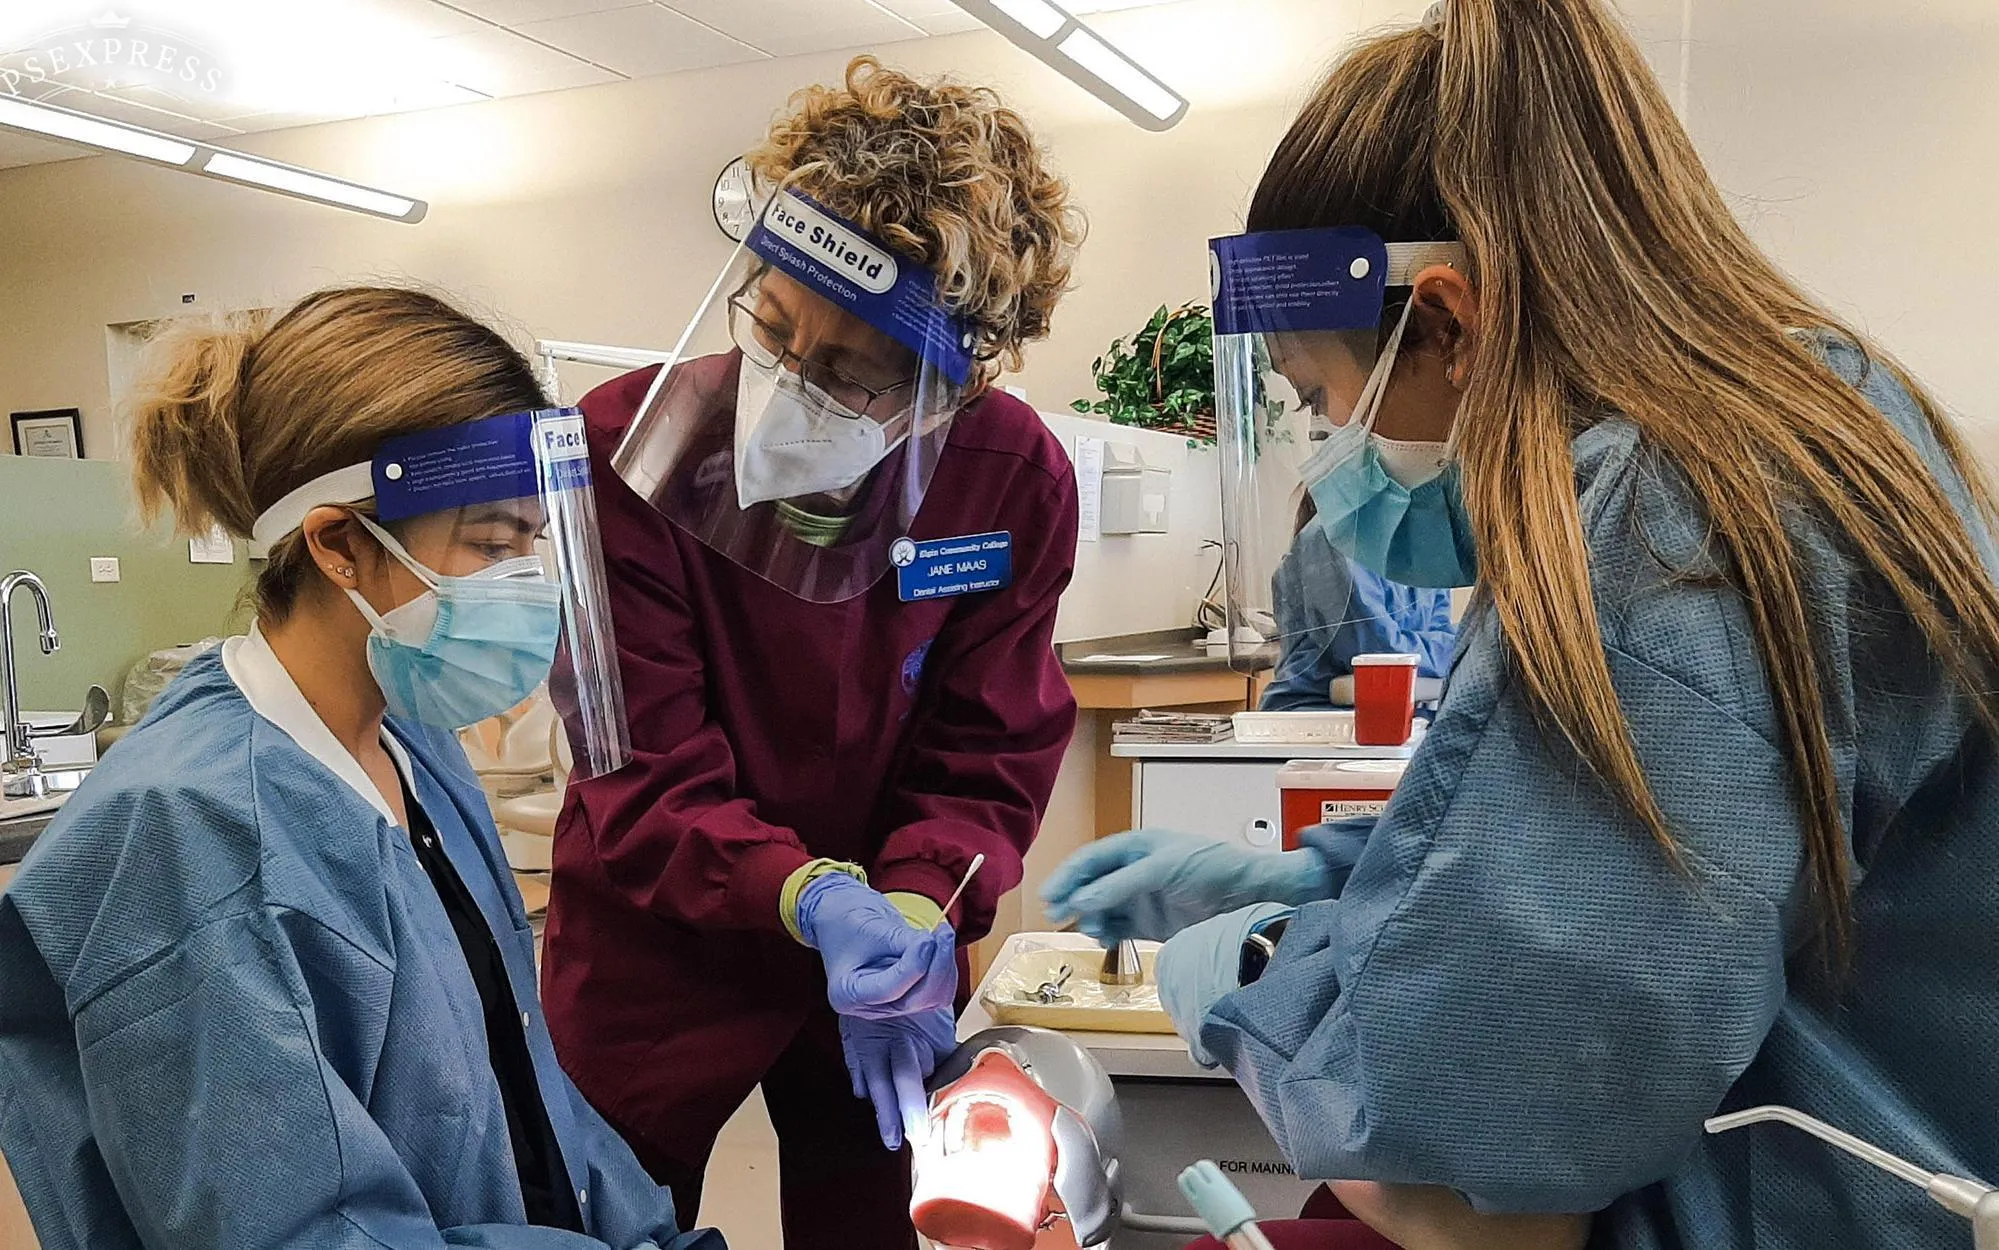 Jane Maas, dental assisting adjunct faculty, demonstrates anesthetic application for two students